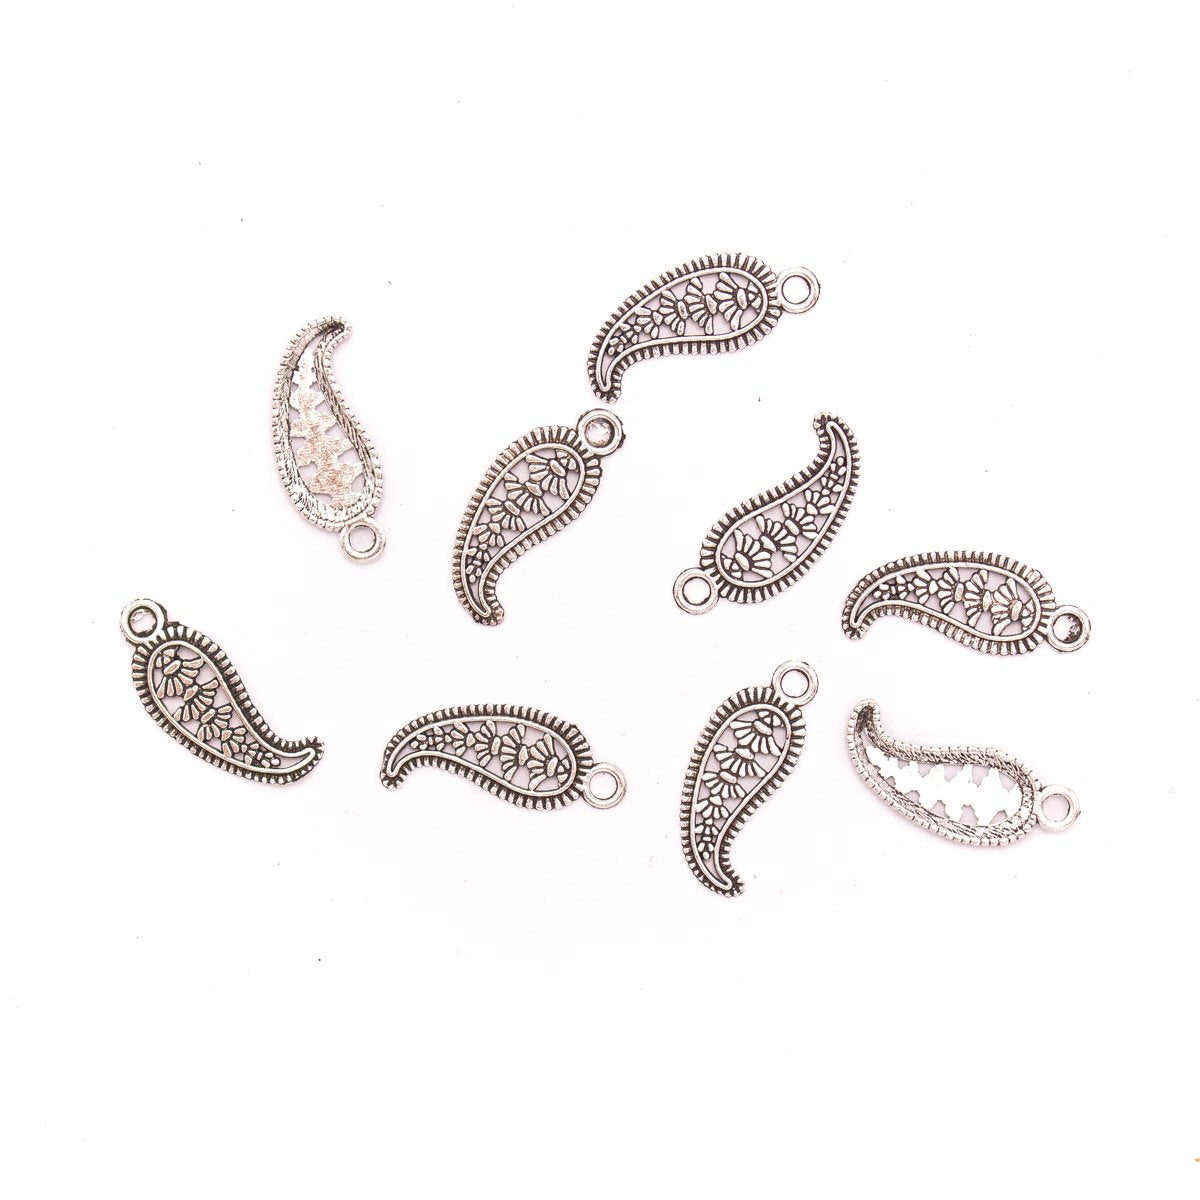 20Pcs Antique sliver feather pendant Silver Charms, DIY Bracelets Necklace Bangle, Leaf Feather Charms Pendant, Charms For Jewelry MakingD-3-445